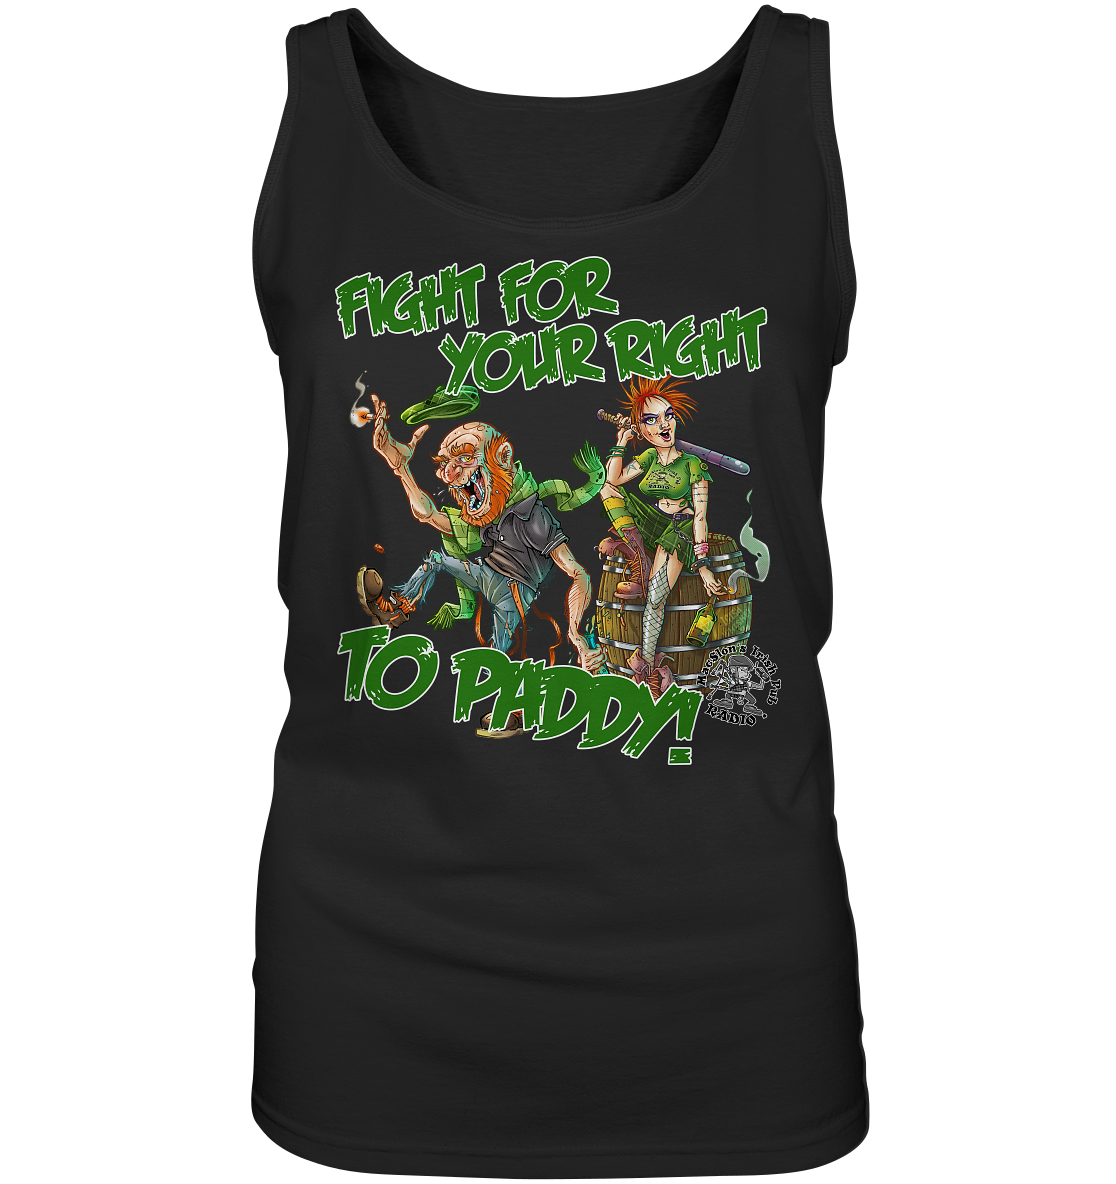 Fight For Your Right To Paddy - Ladies Tank-Top